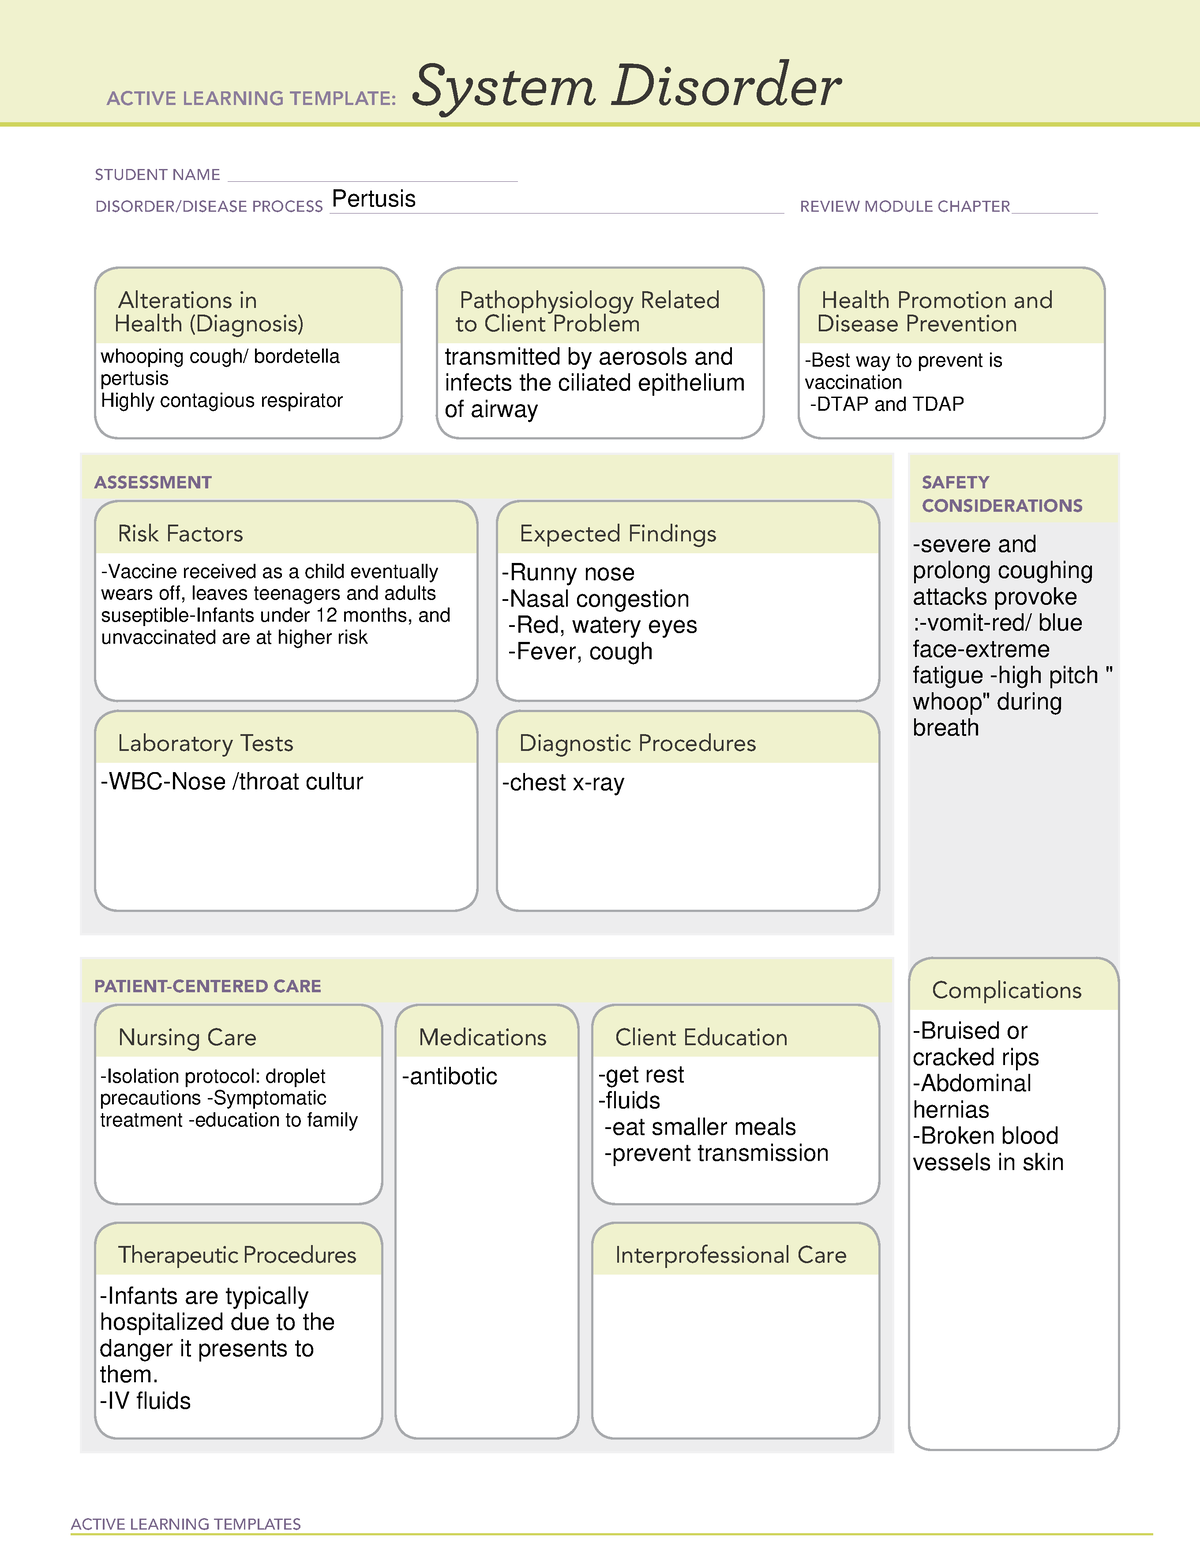 Pertusis - ATI TEMPLATE - ACTIVE LEARNING TEMPLATES System Disorder ...